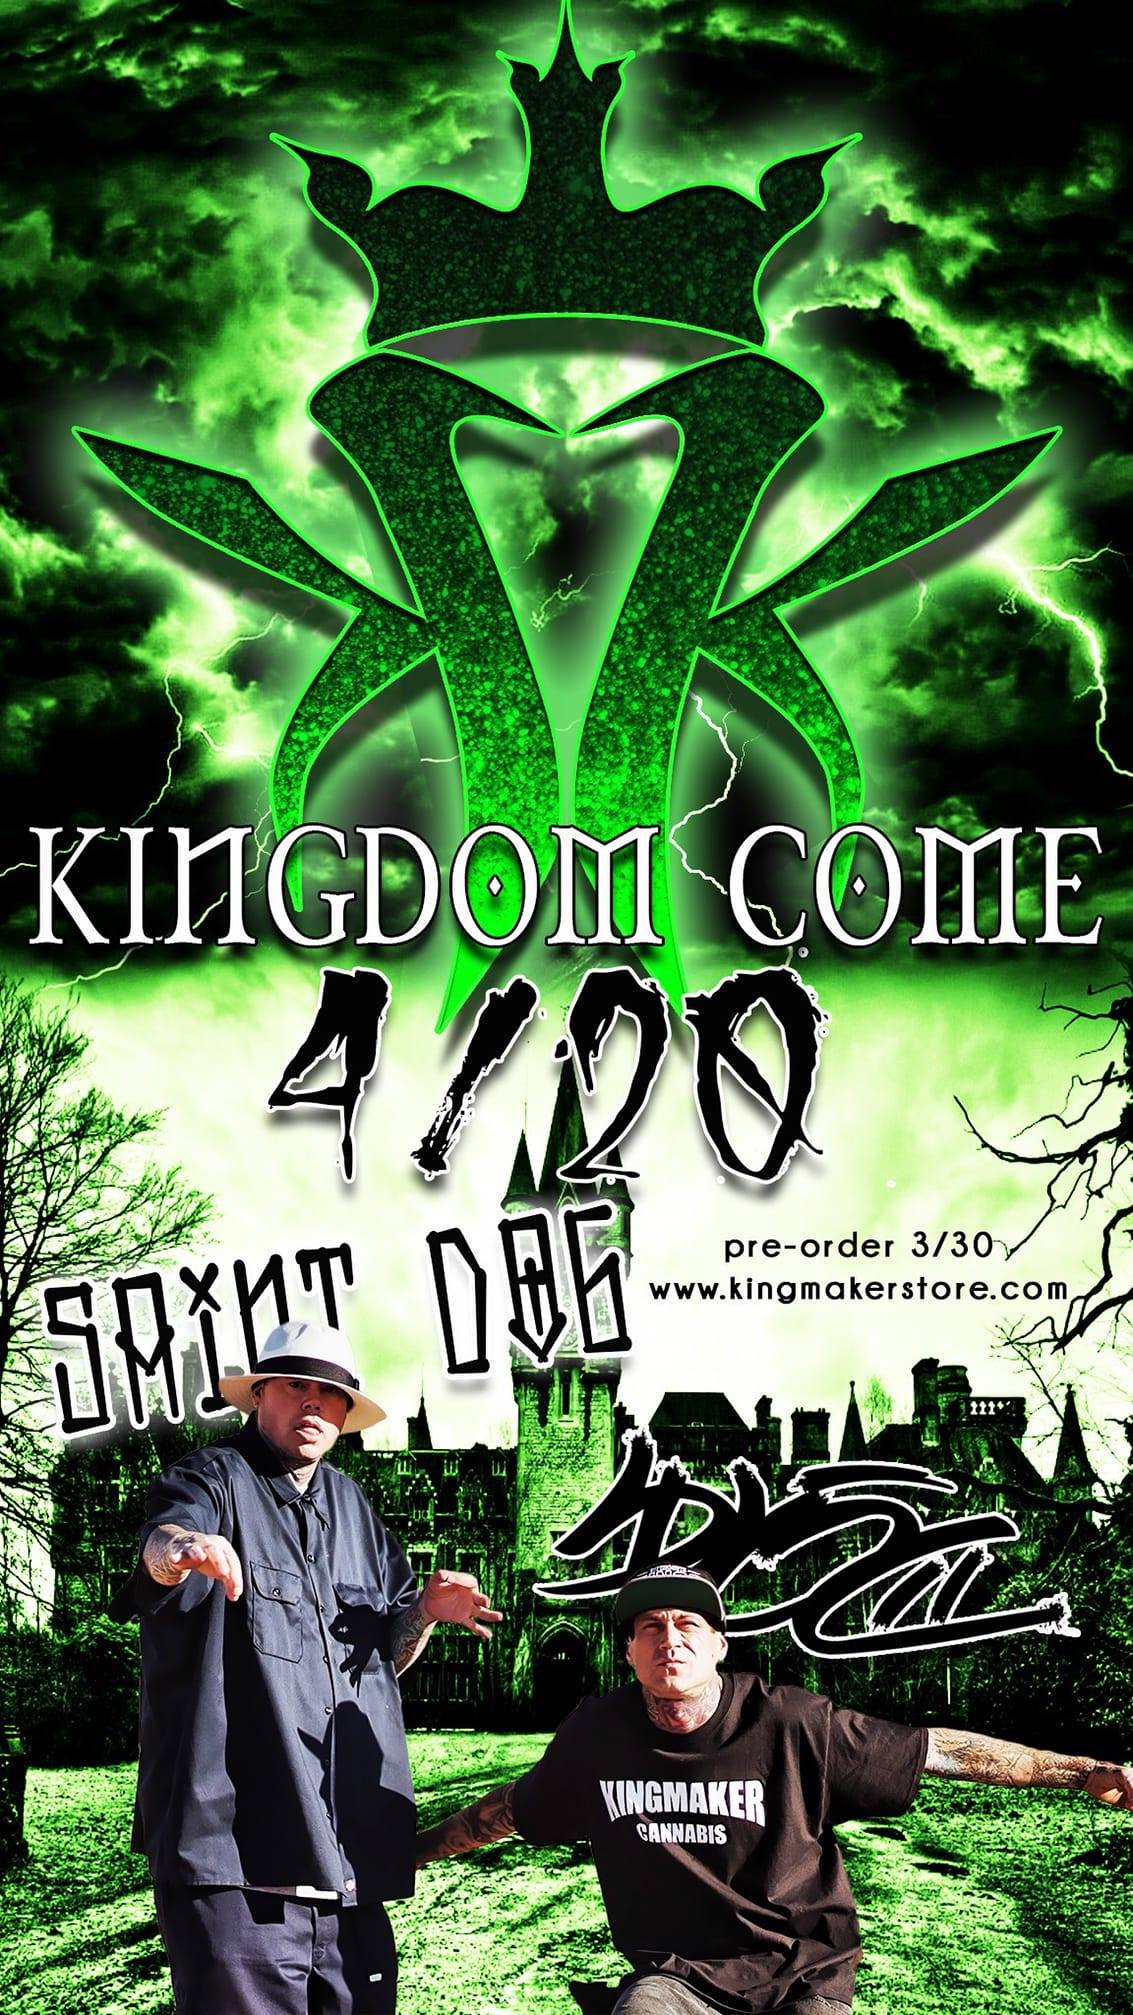 D Loc Interviewed About Kottonmouth Kings, “Kingdom Come